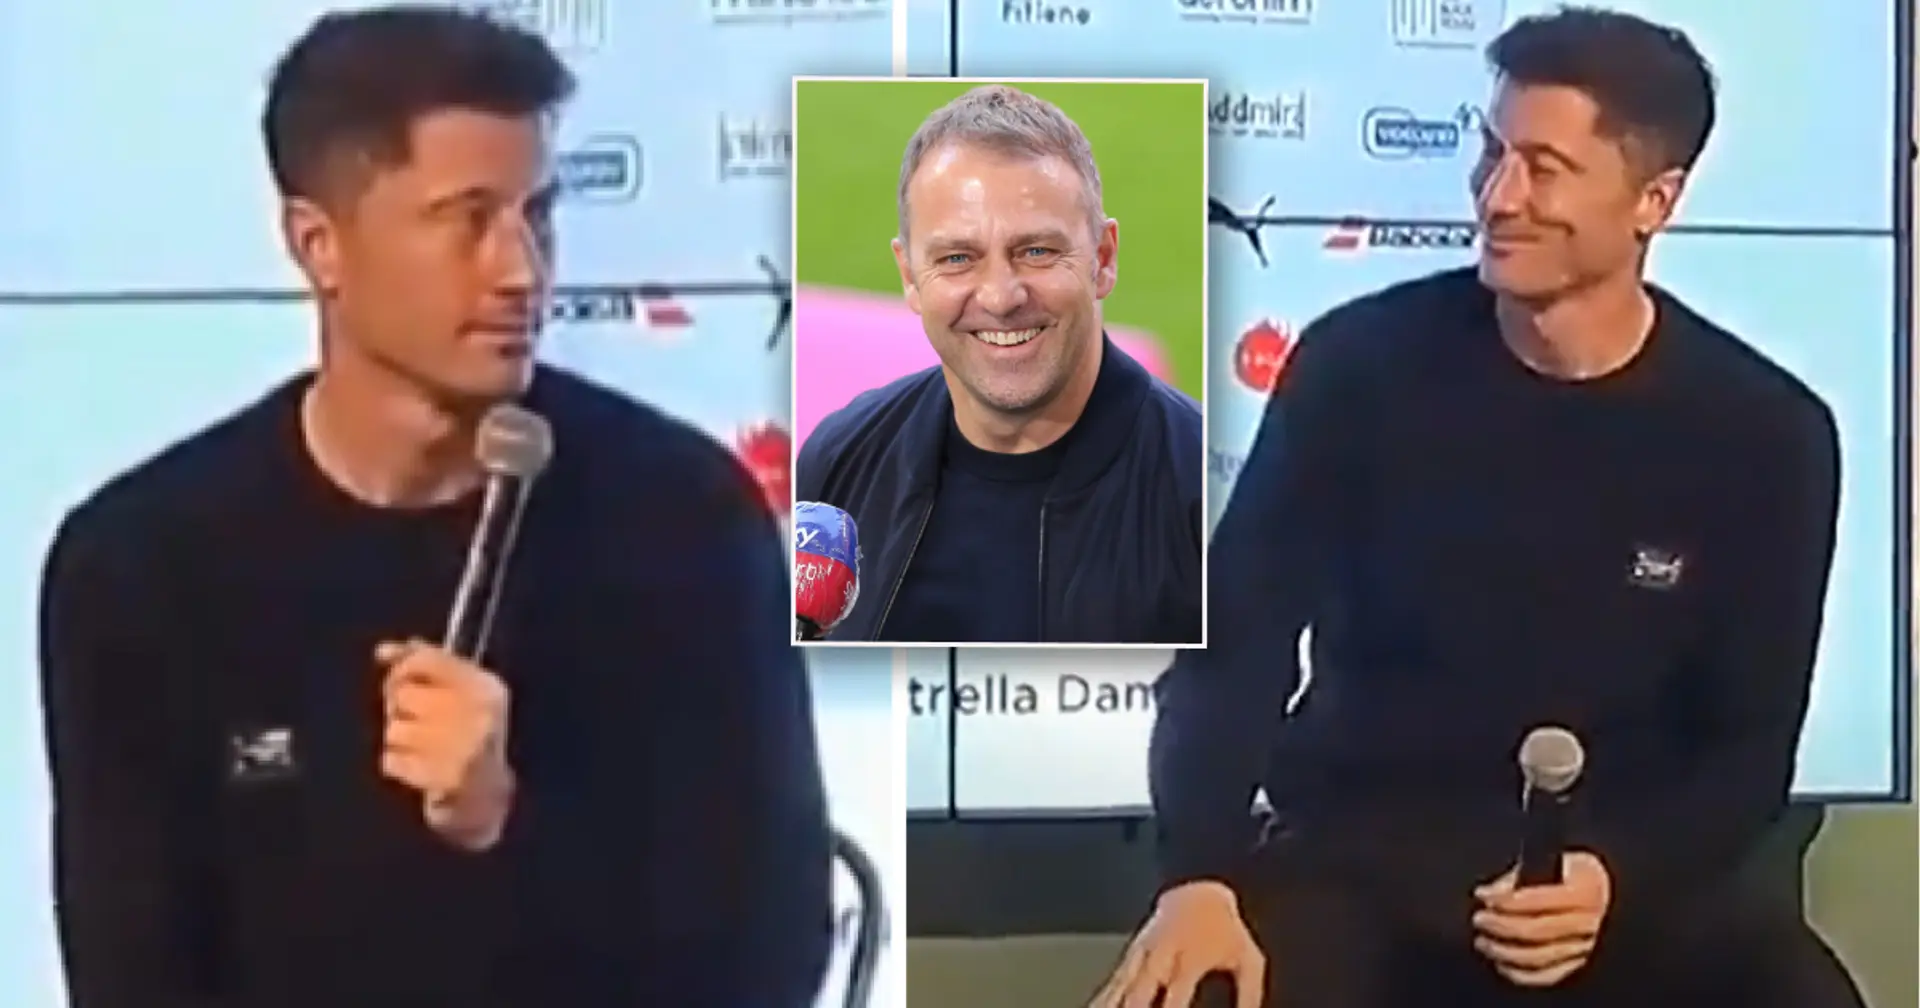 'A good person': Lewandowski's embarrassed reaction when asked about Hansi Flick – spotted